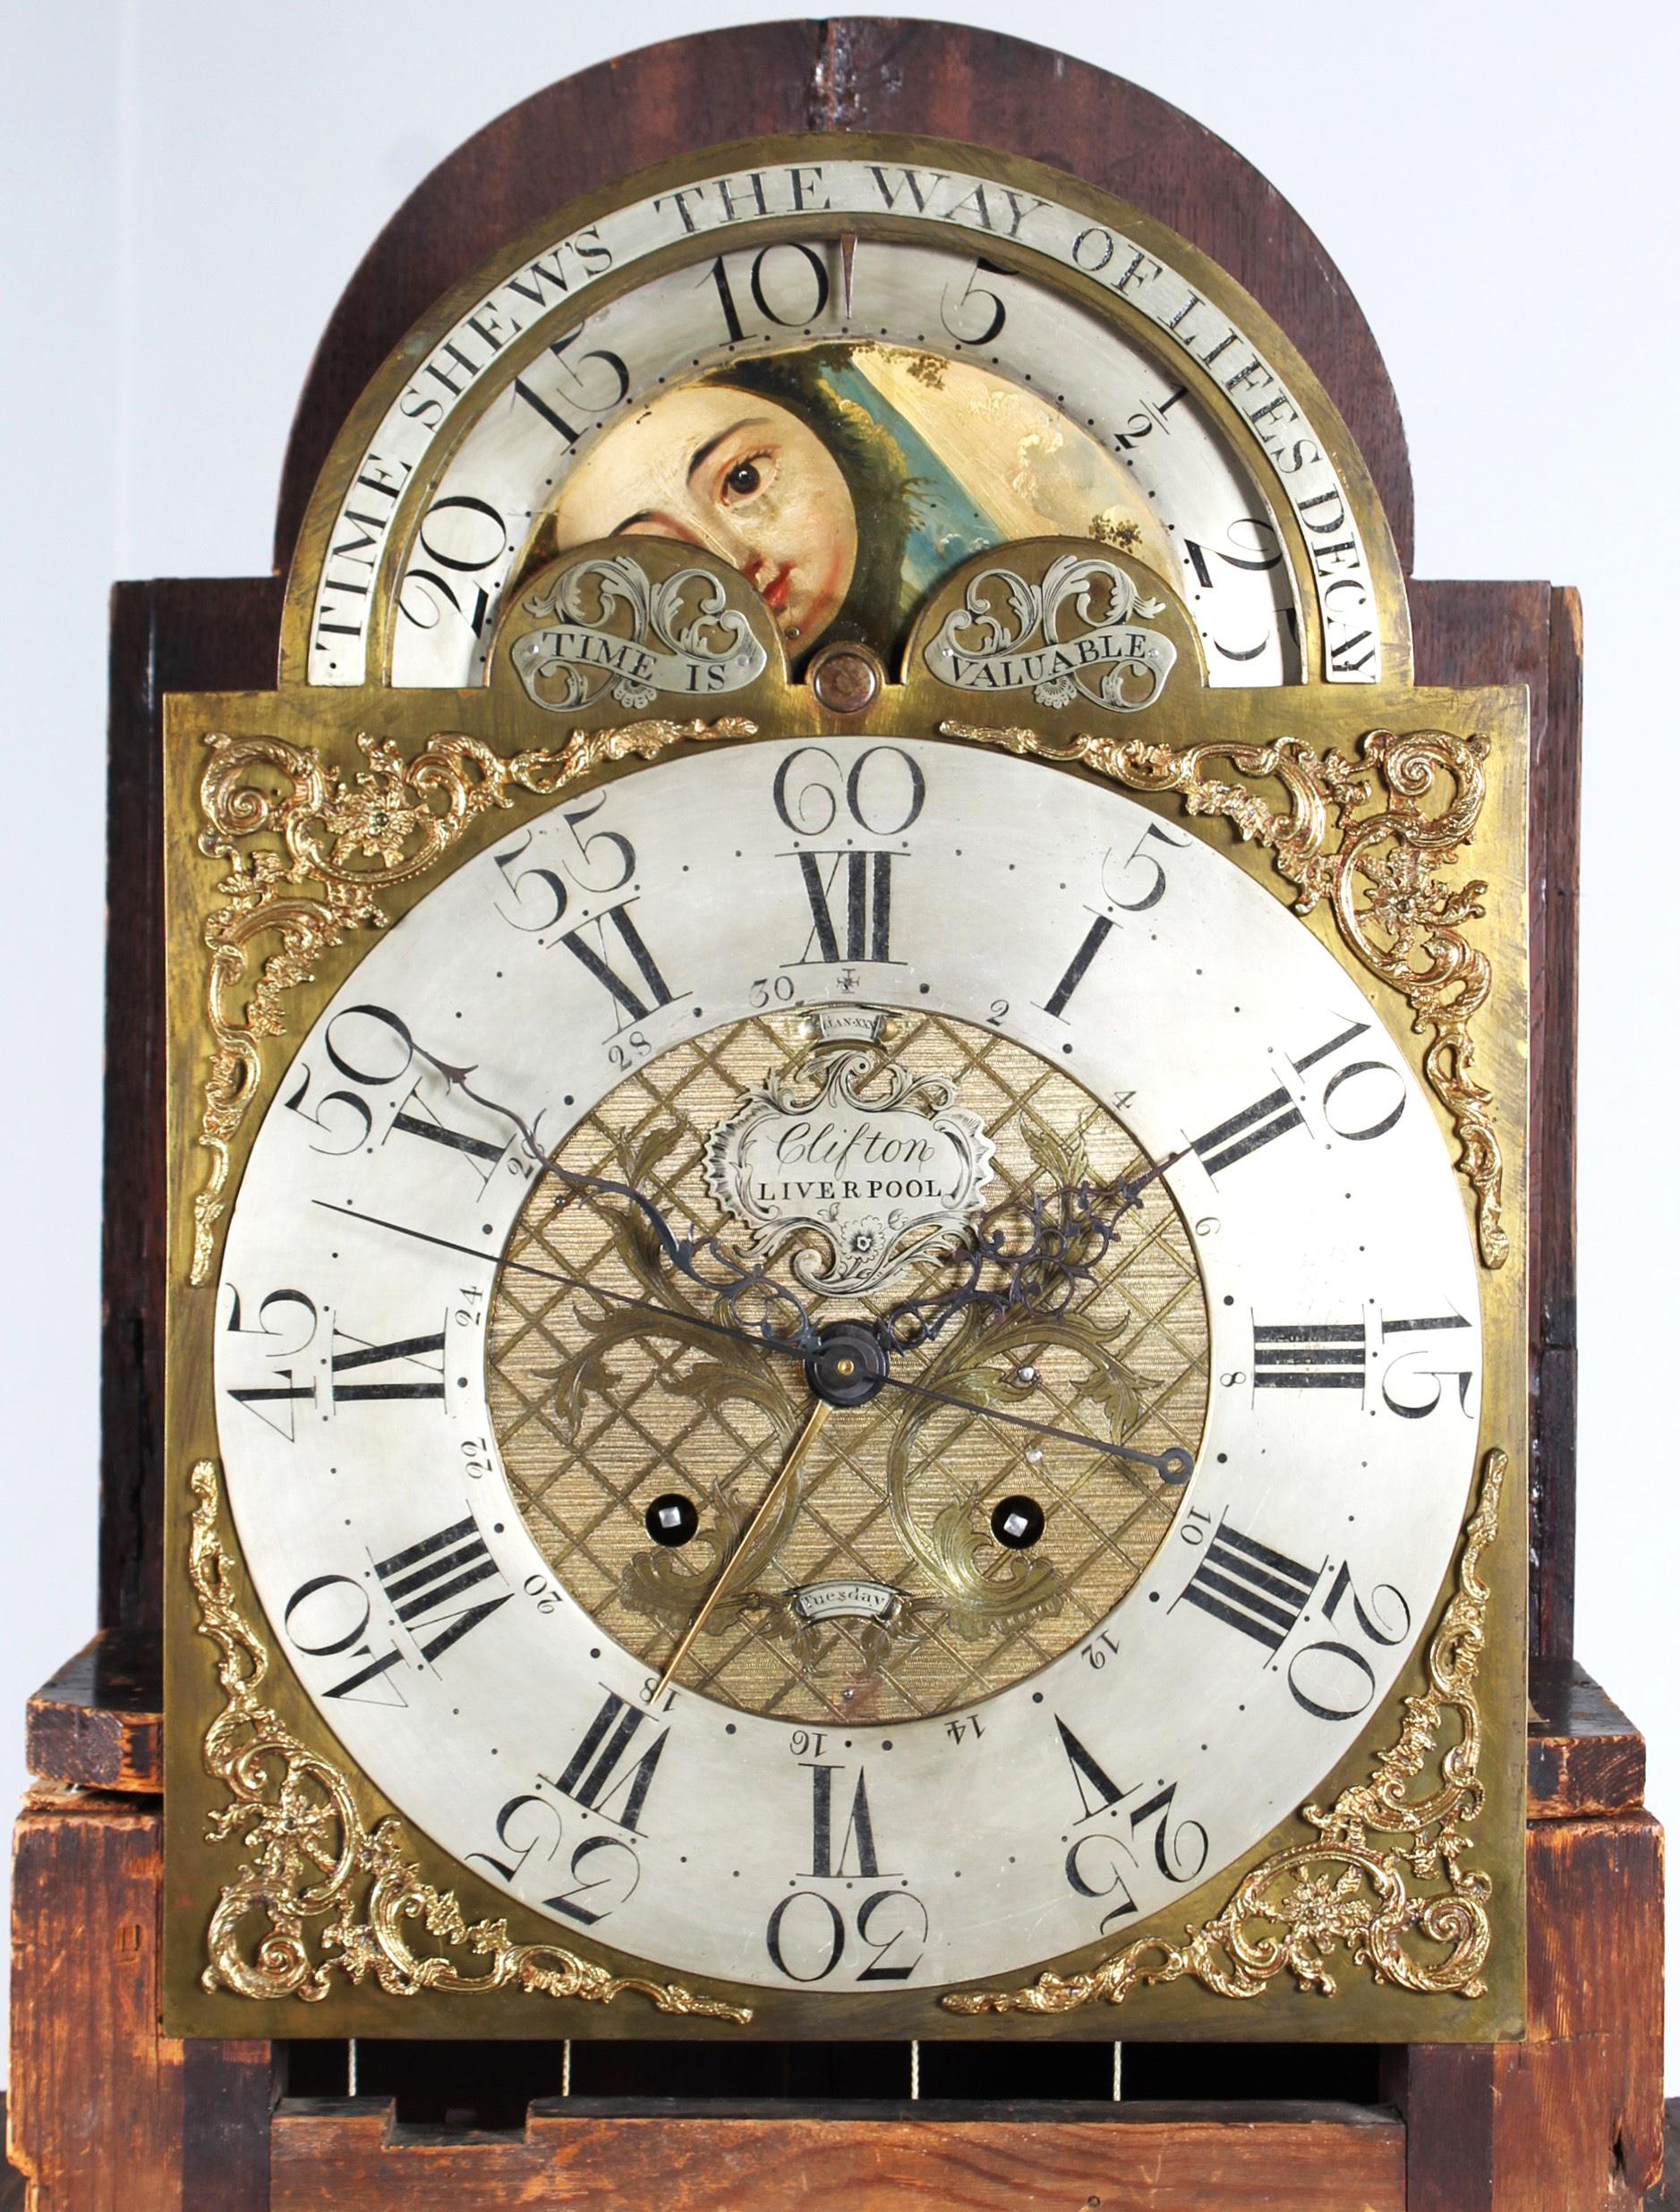 Louis XVI Longcase Clock, Moonphases, Date and Seconds, John Clifton Liverpool, circa 1785 For Sale